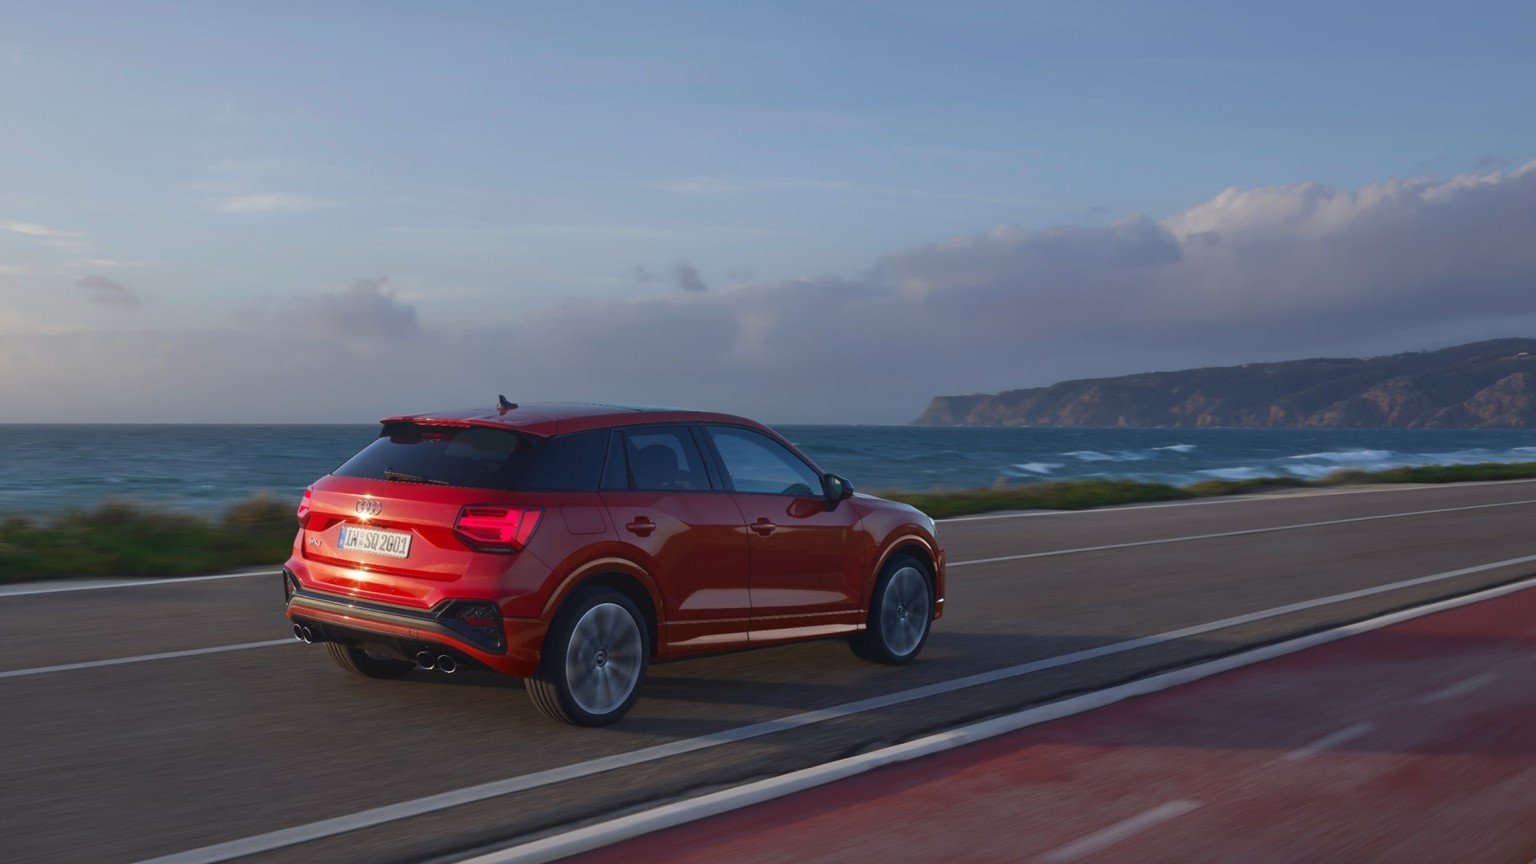 Rear-side view of the Audi SQ2.